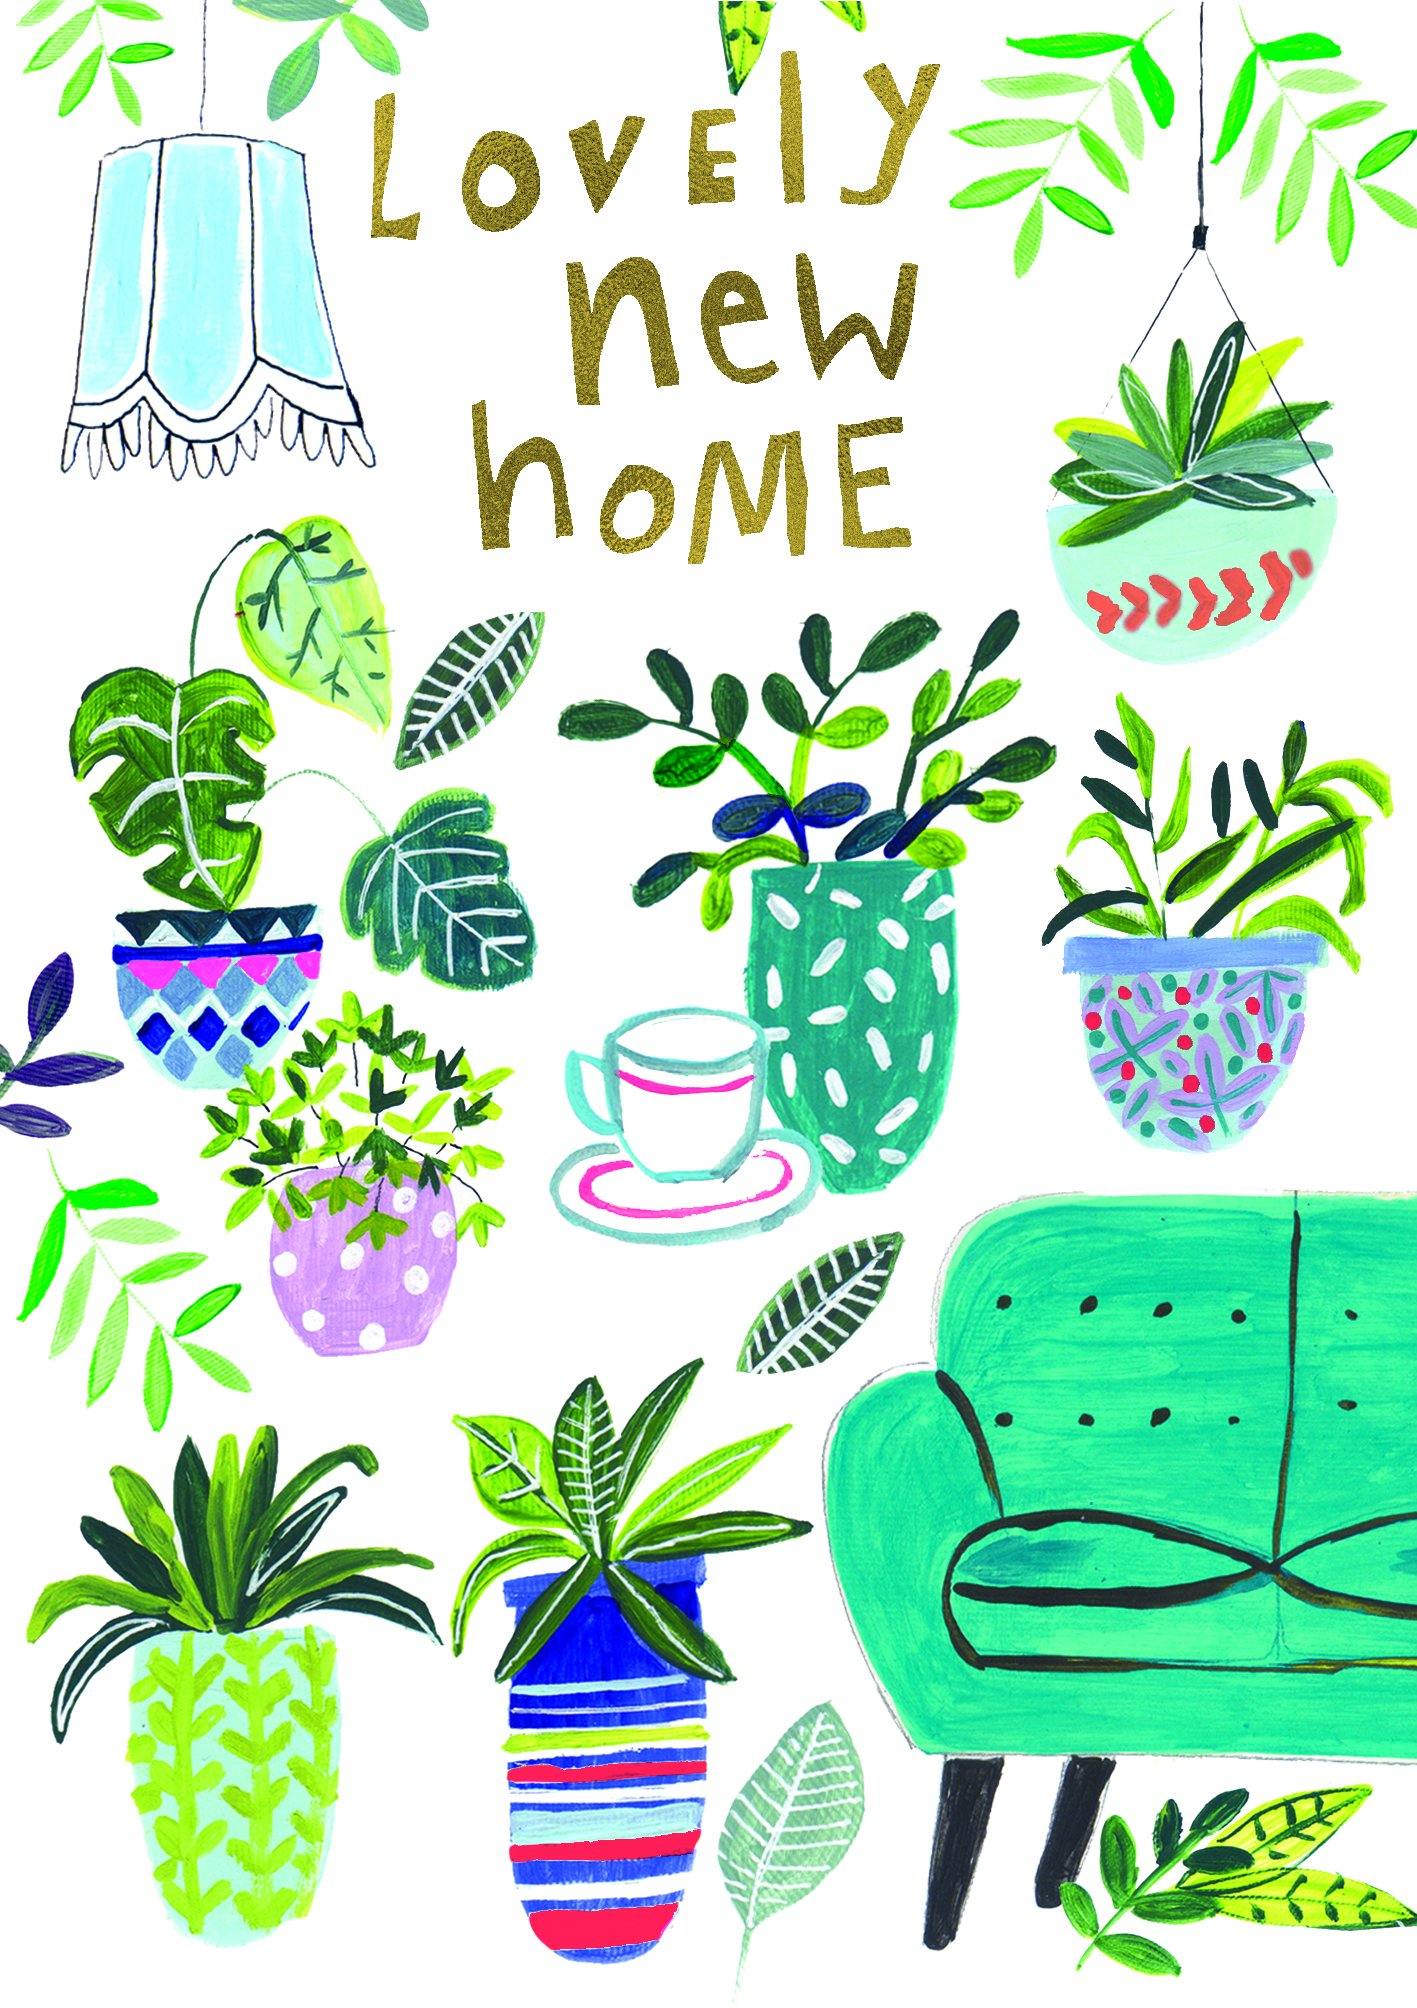 House Plants Lovely New Home Card - Penny Black